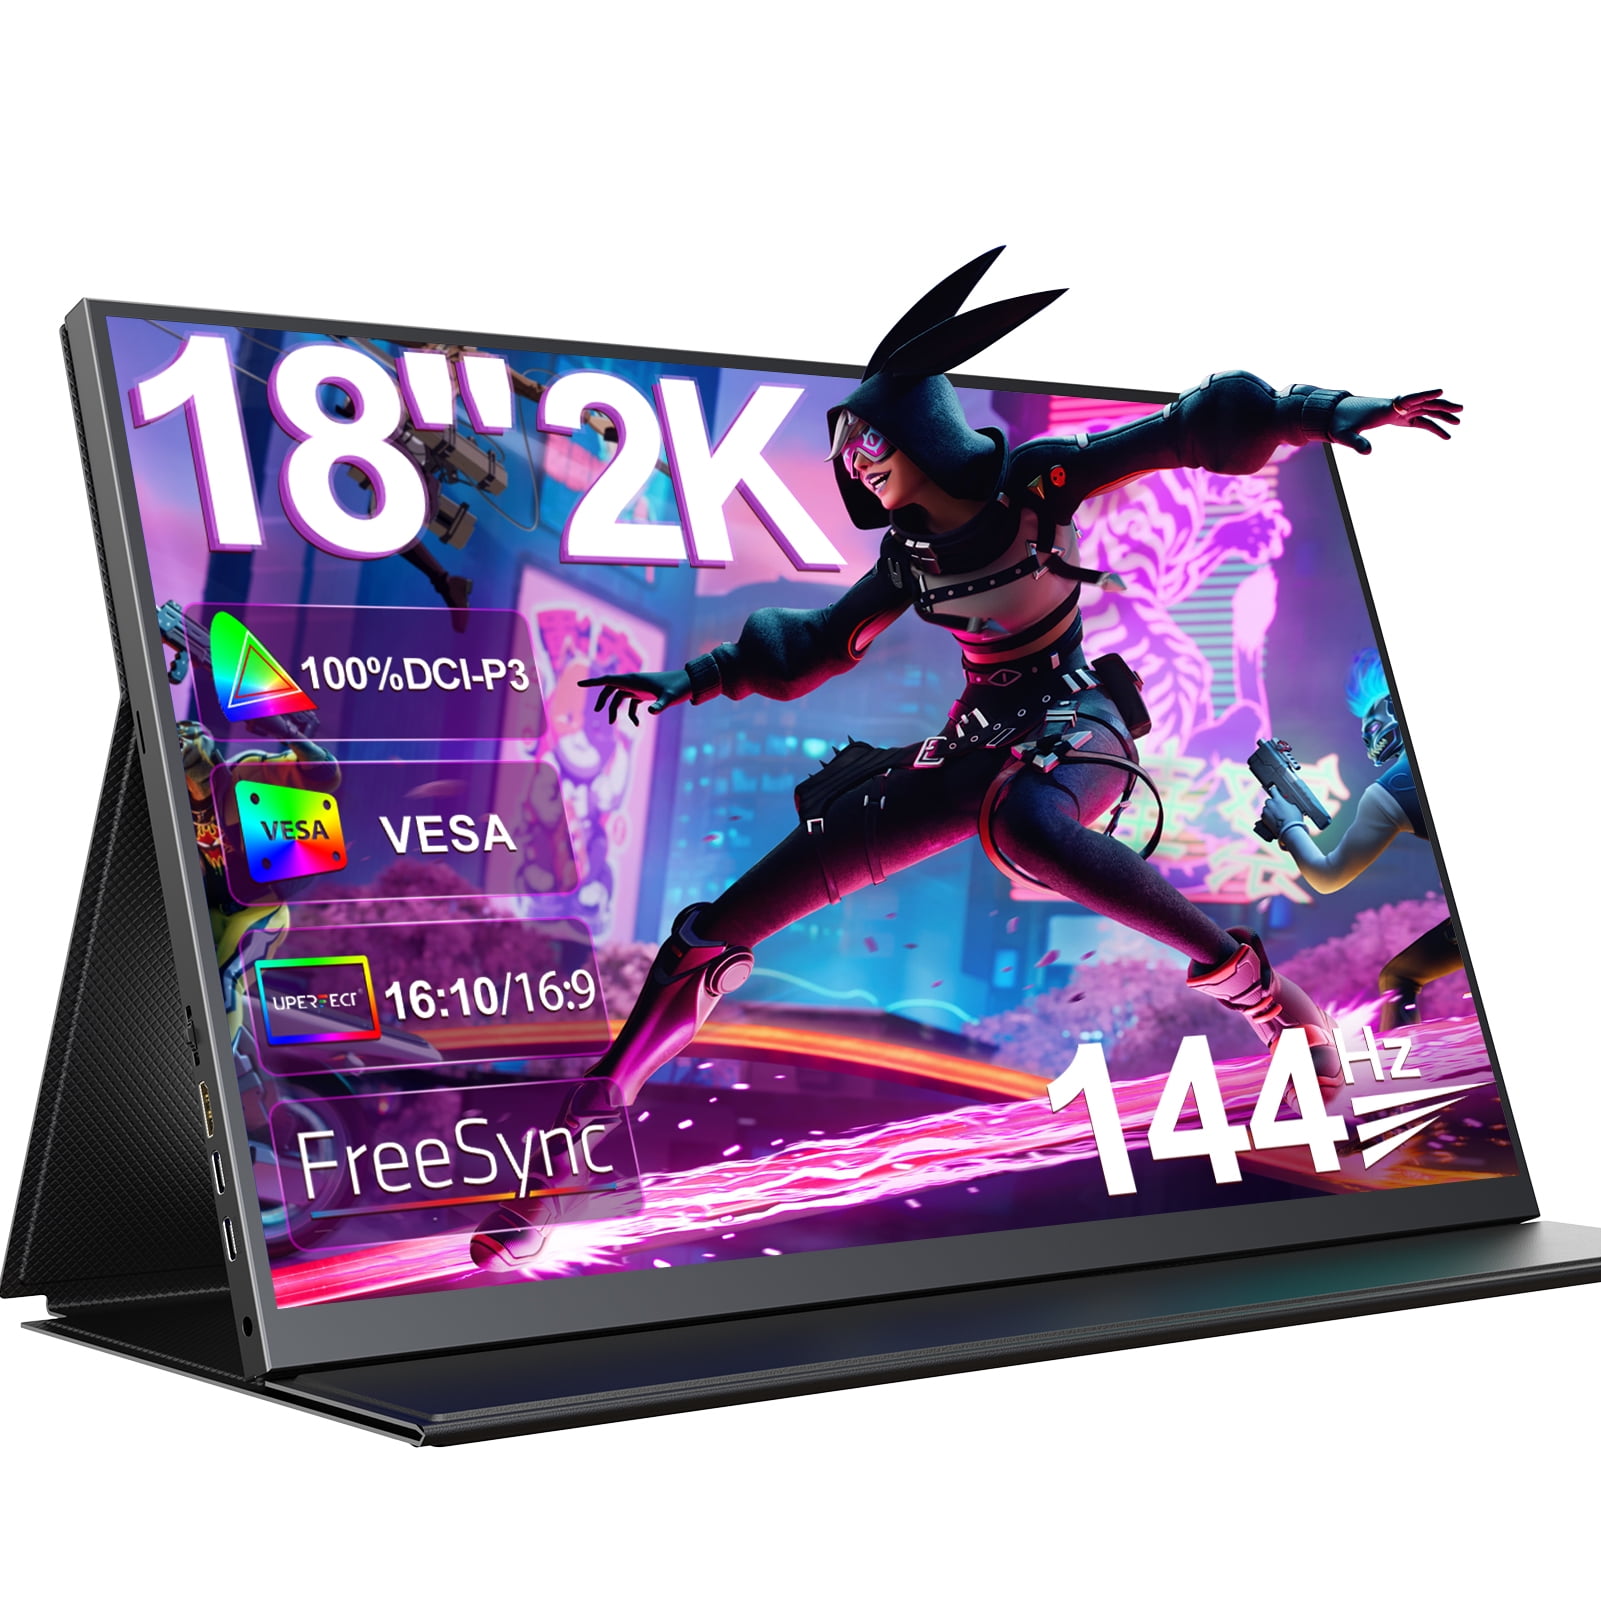 UPERFECT 144HZ Portable Gaming Monitor， 18 2K 2560x1600 QHD 100% DCI-P3  Screen 